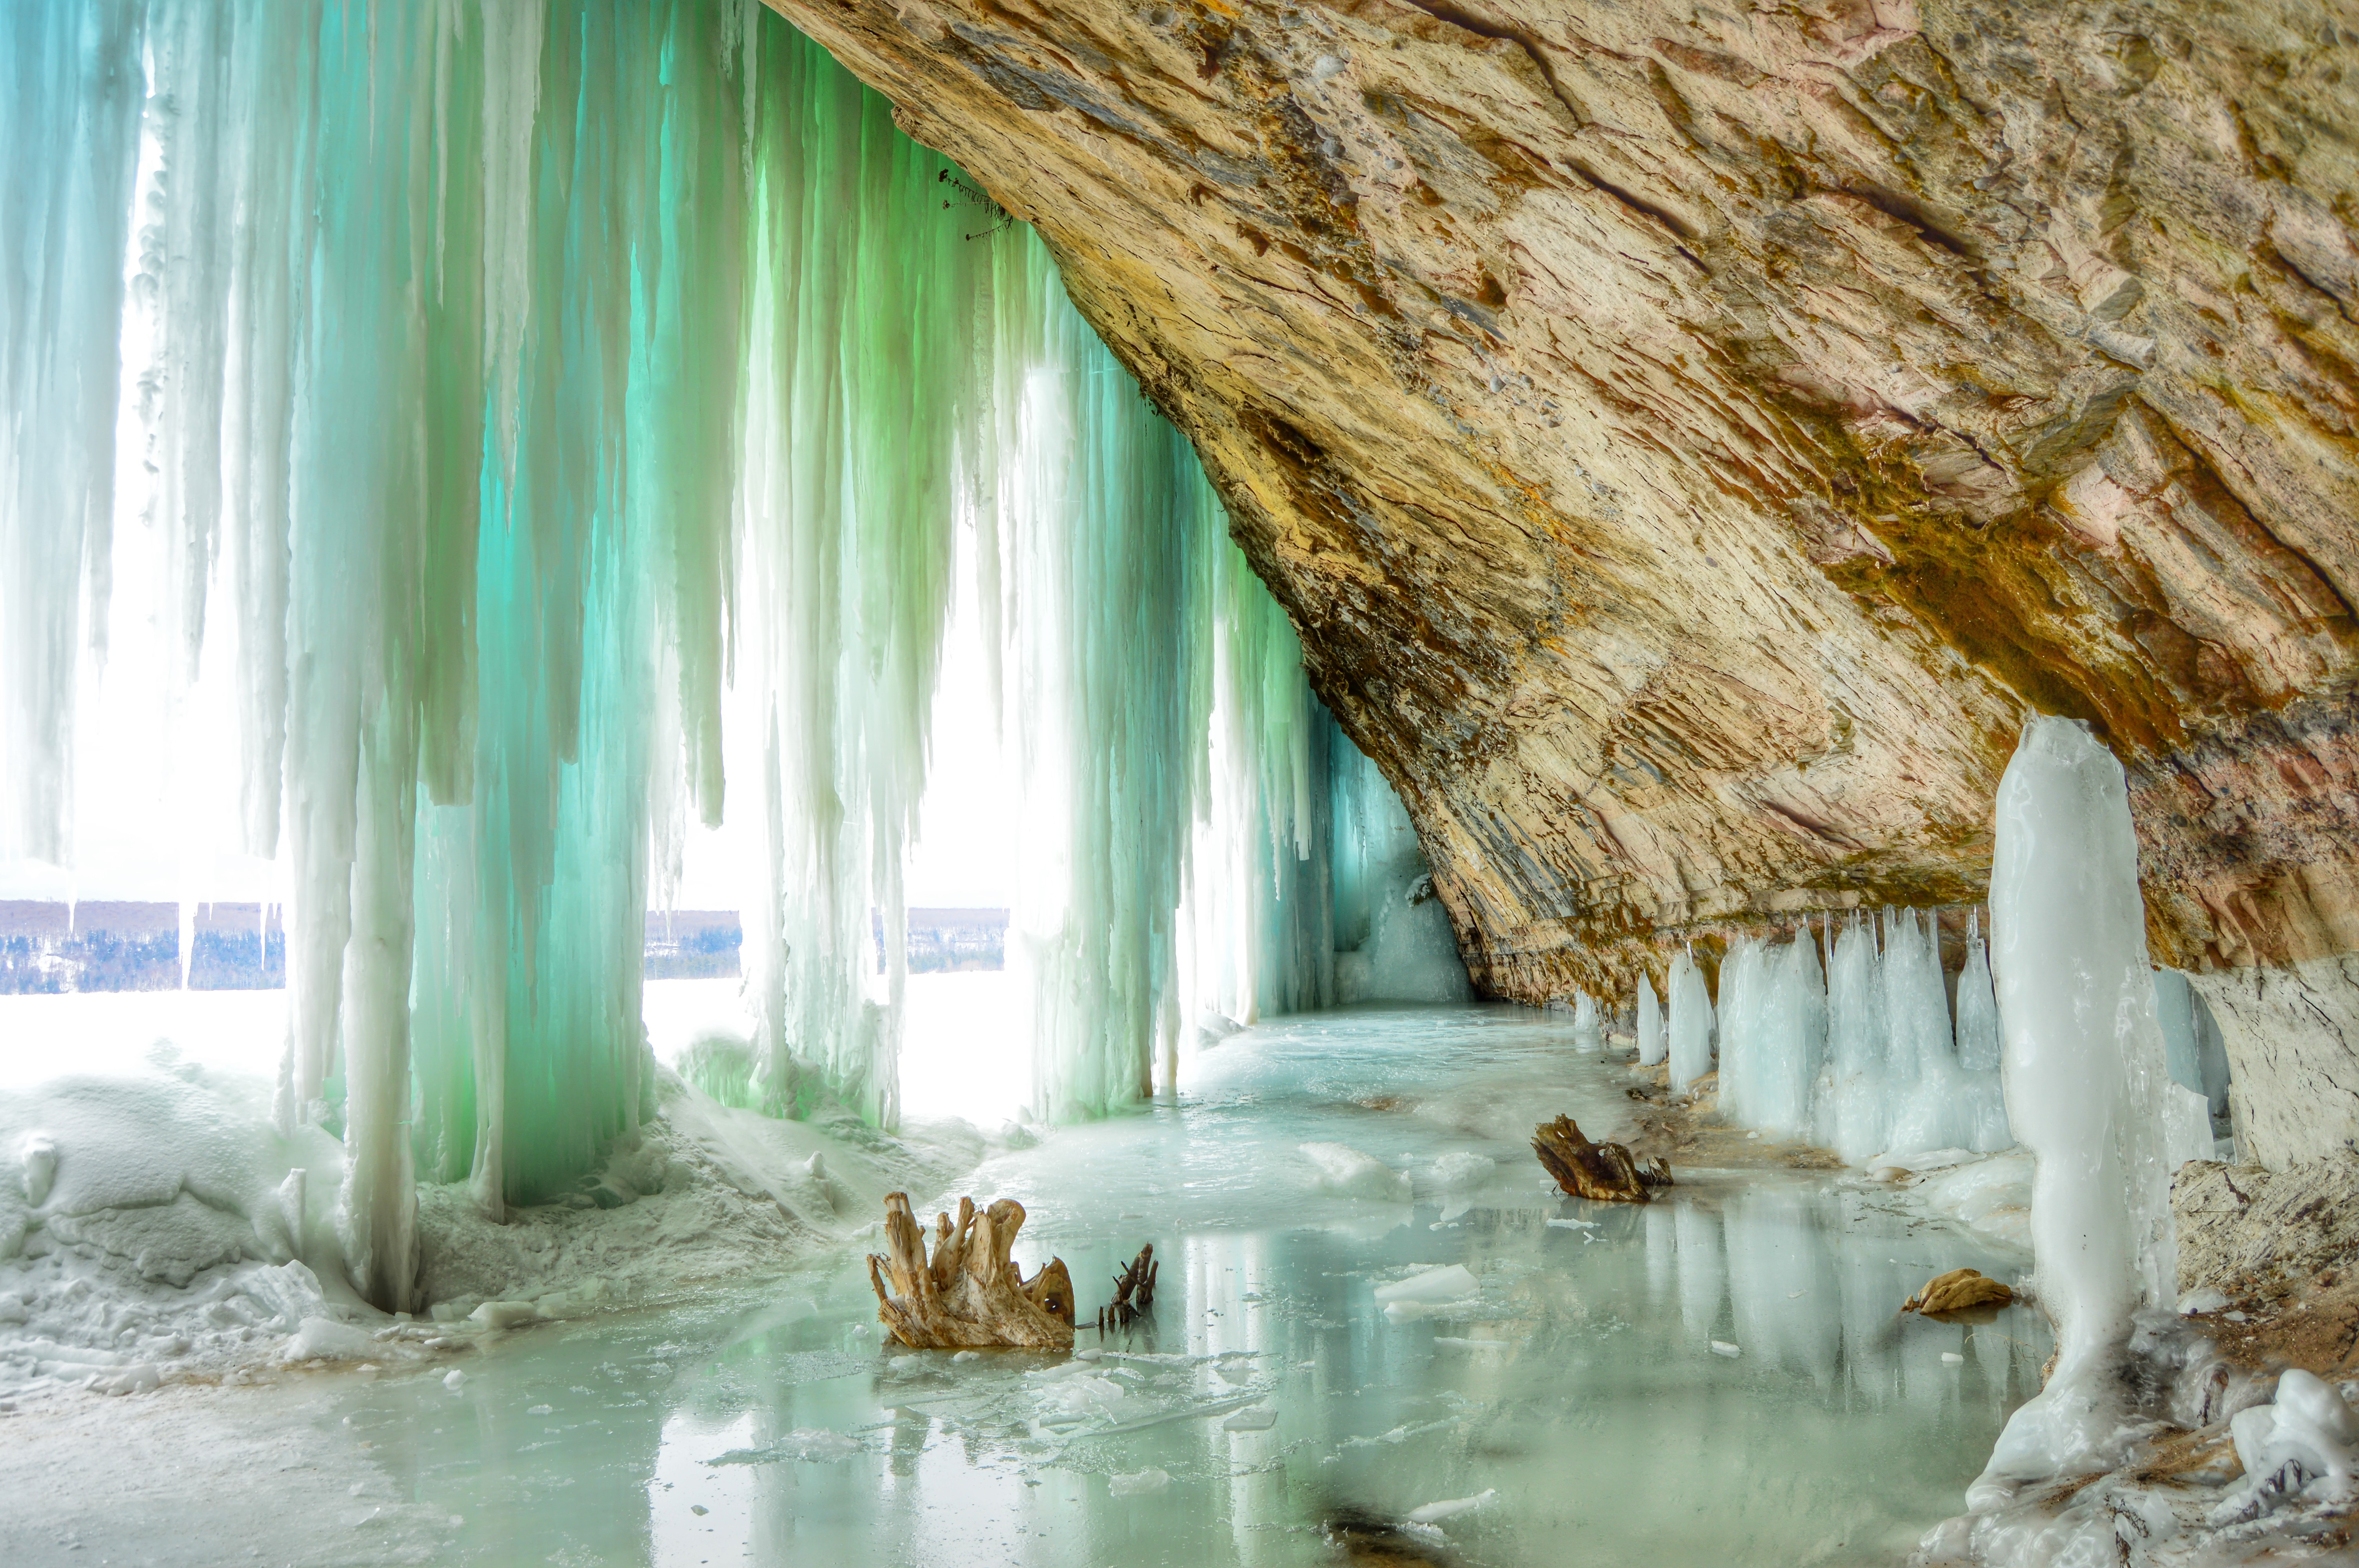 Ice formations are a beautiful aspect of winter on the Hiawatha